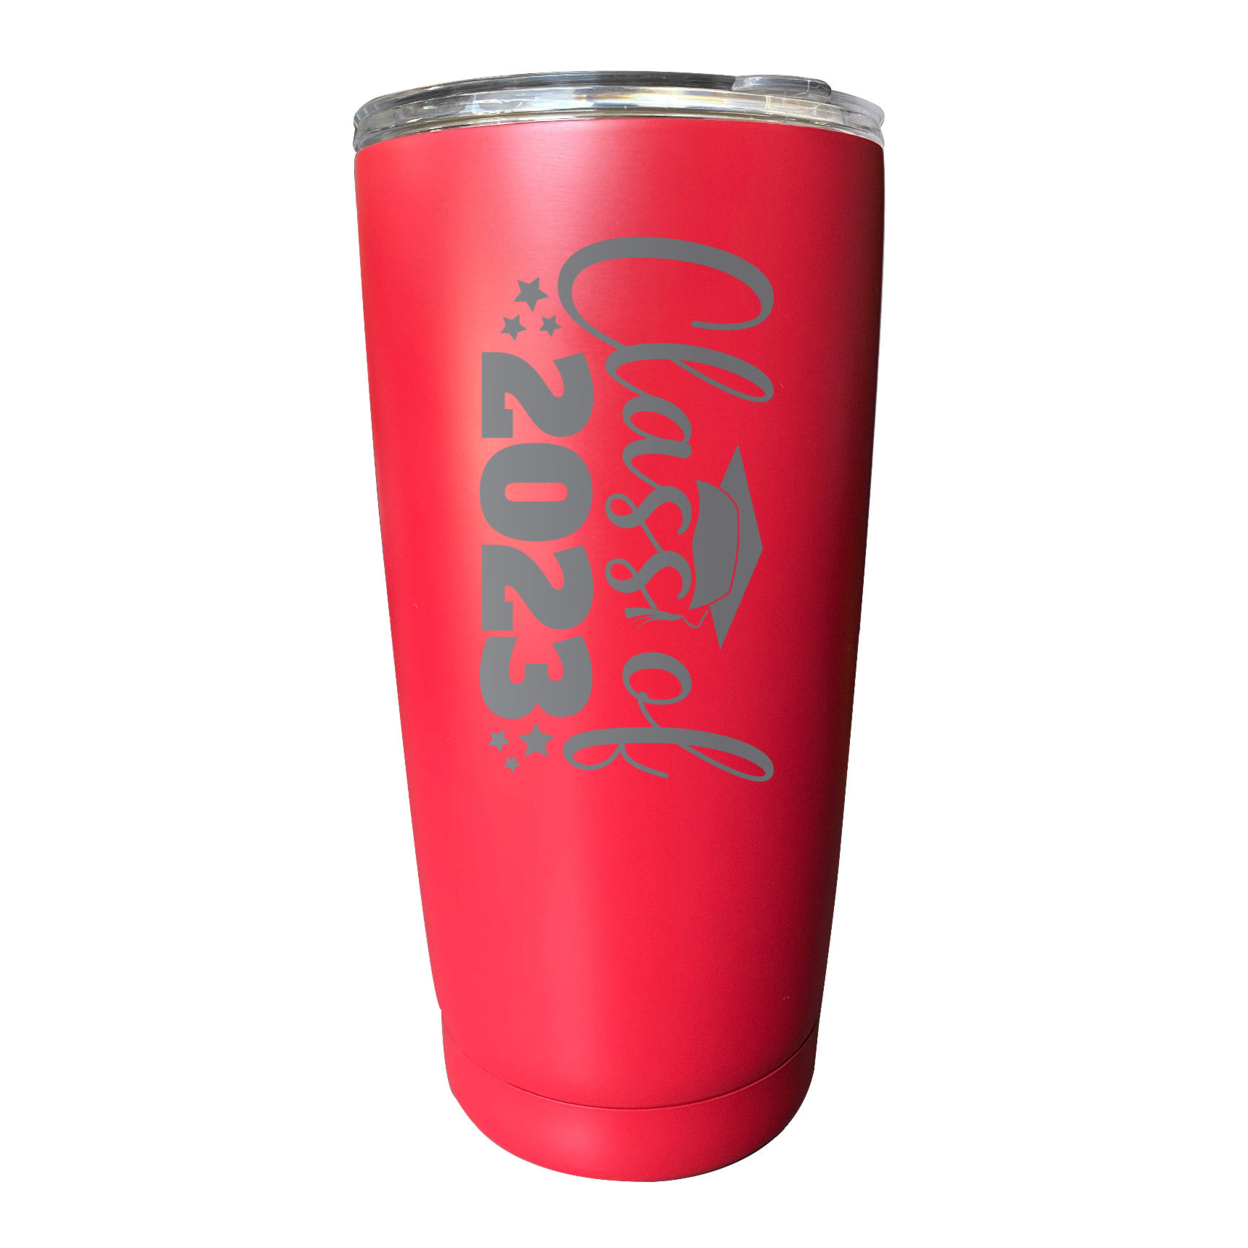 Class Of 2023 Graduation 16 Oz Engraved Stainless Steel Insulated Tumbler Colors - Red